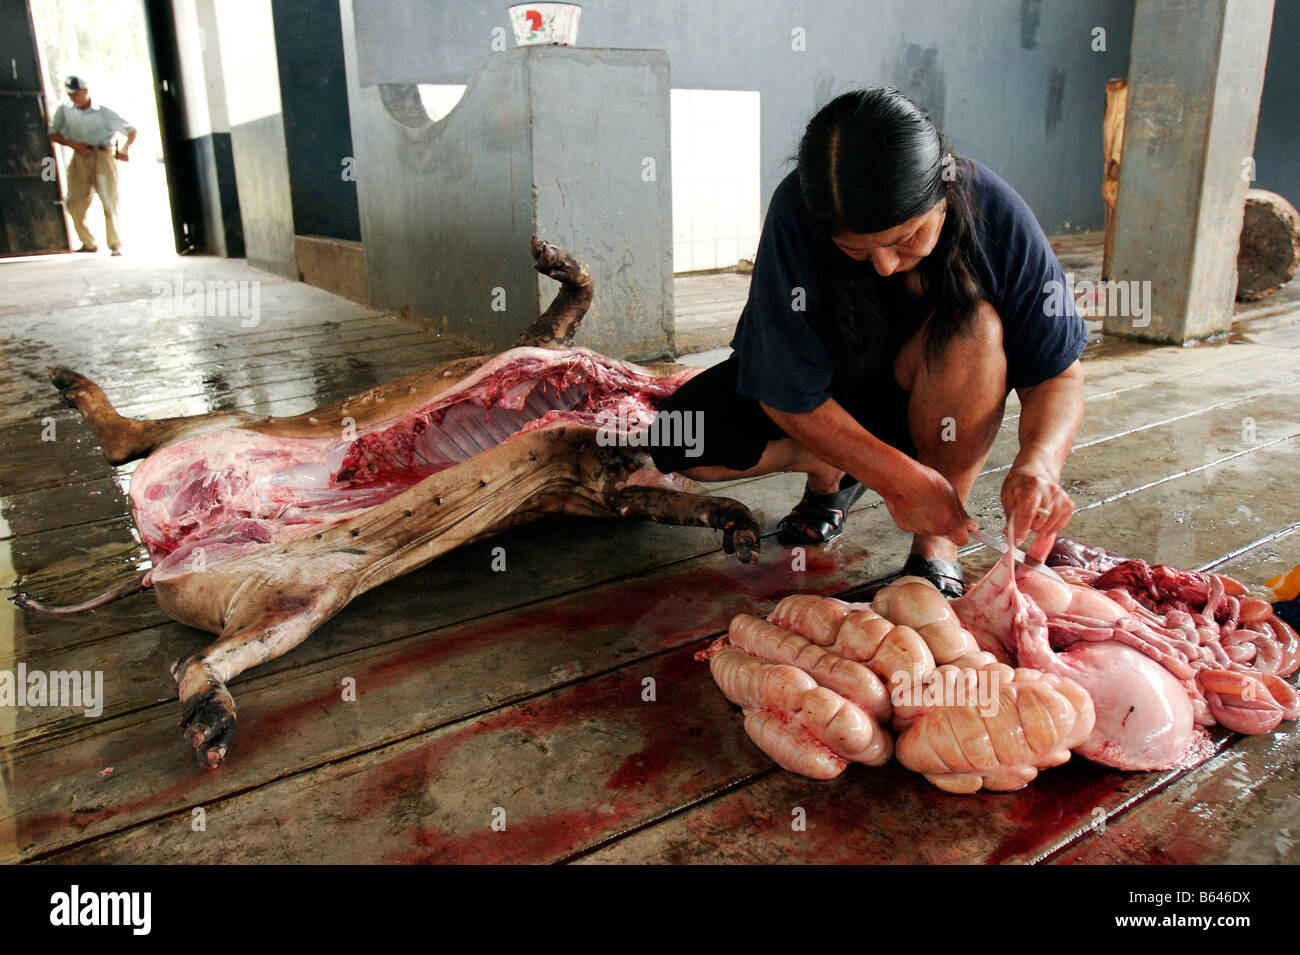 A WOMAN WORKING IN THE SLAUGHTERHOUSE IS PREPARING THE INTESTINES OF THE SACRIFICED ANIMALS TO SELL THEM LATER IN THE LOCAL MARK Stock Photo